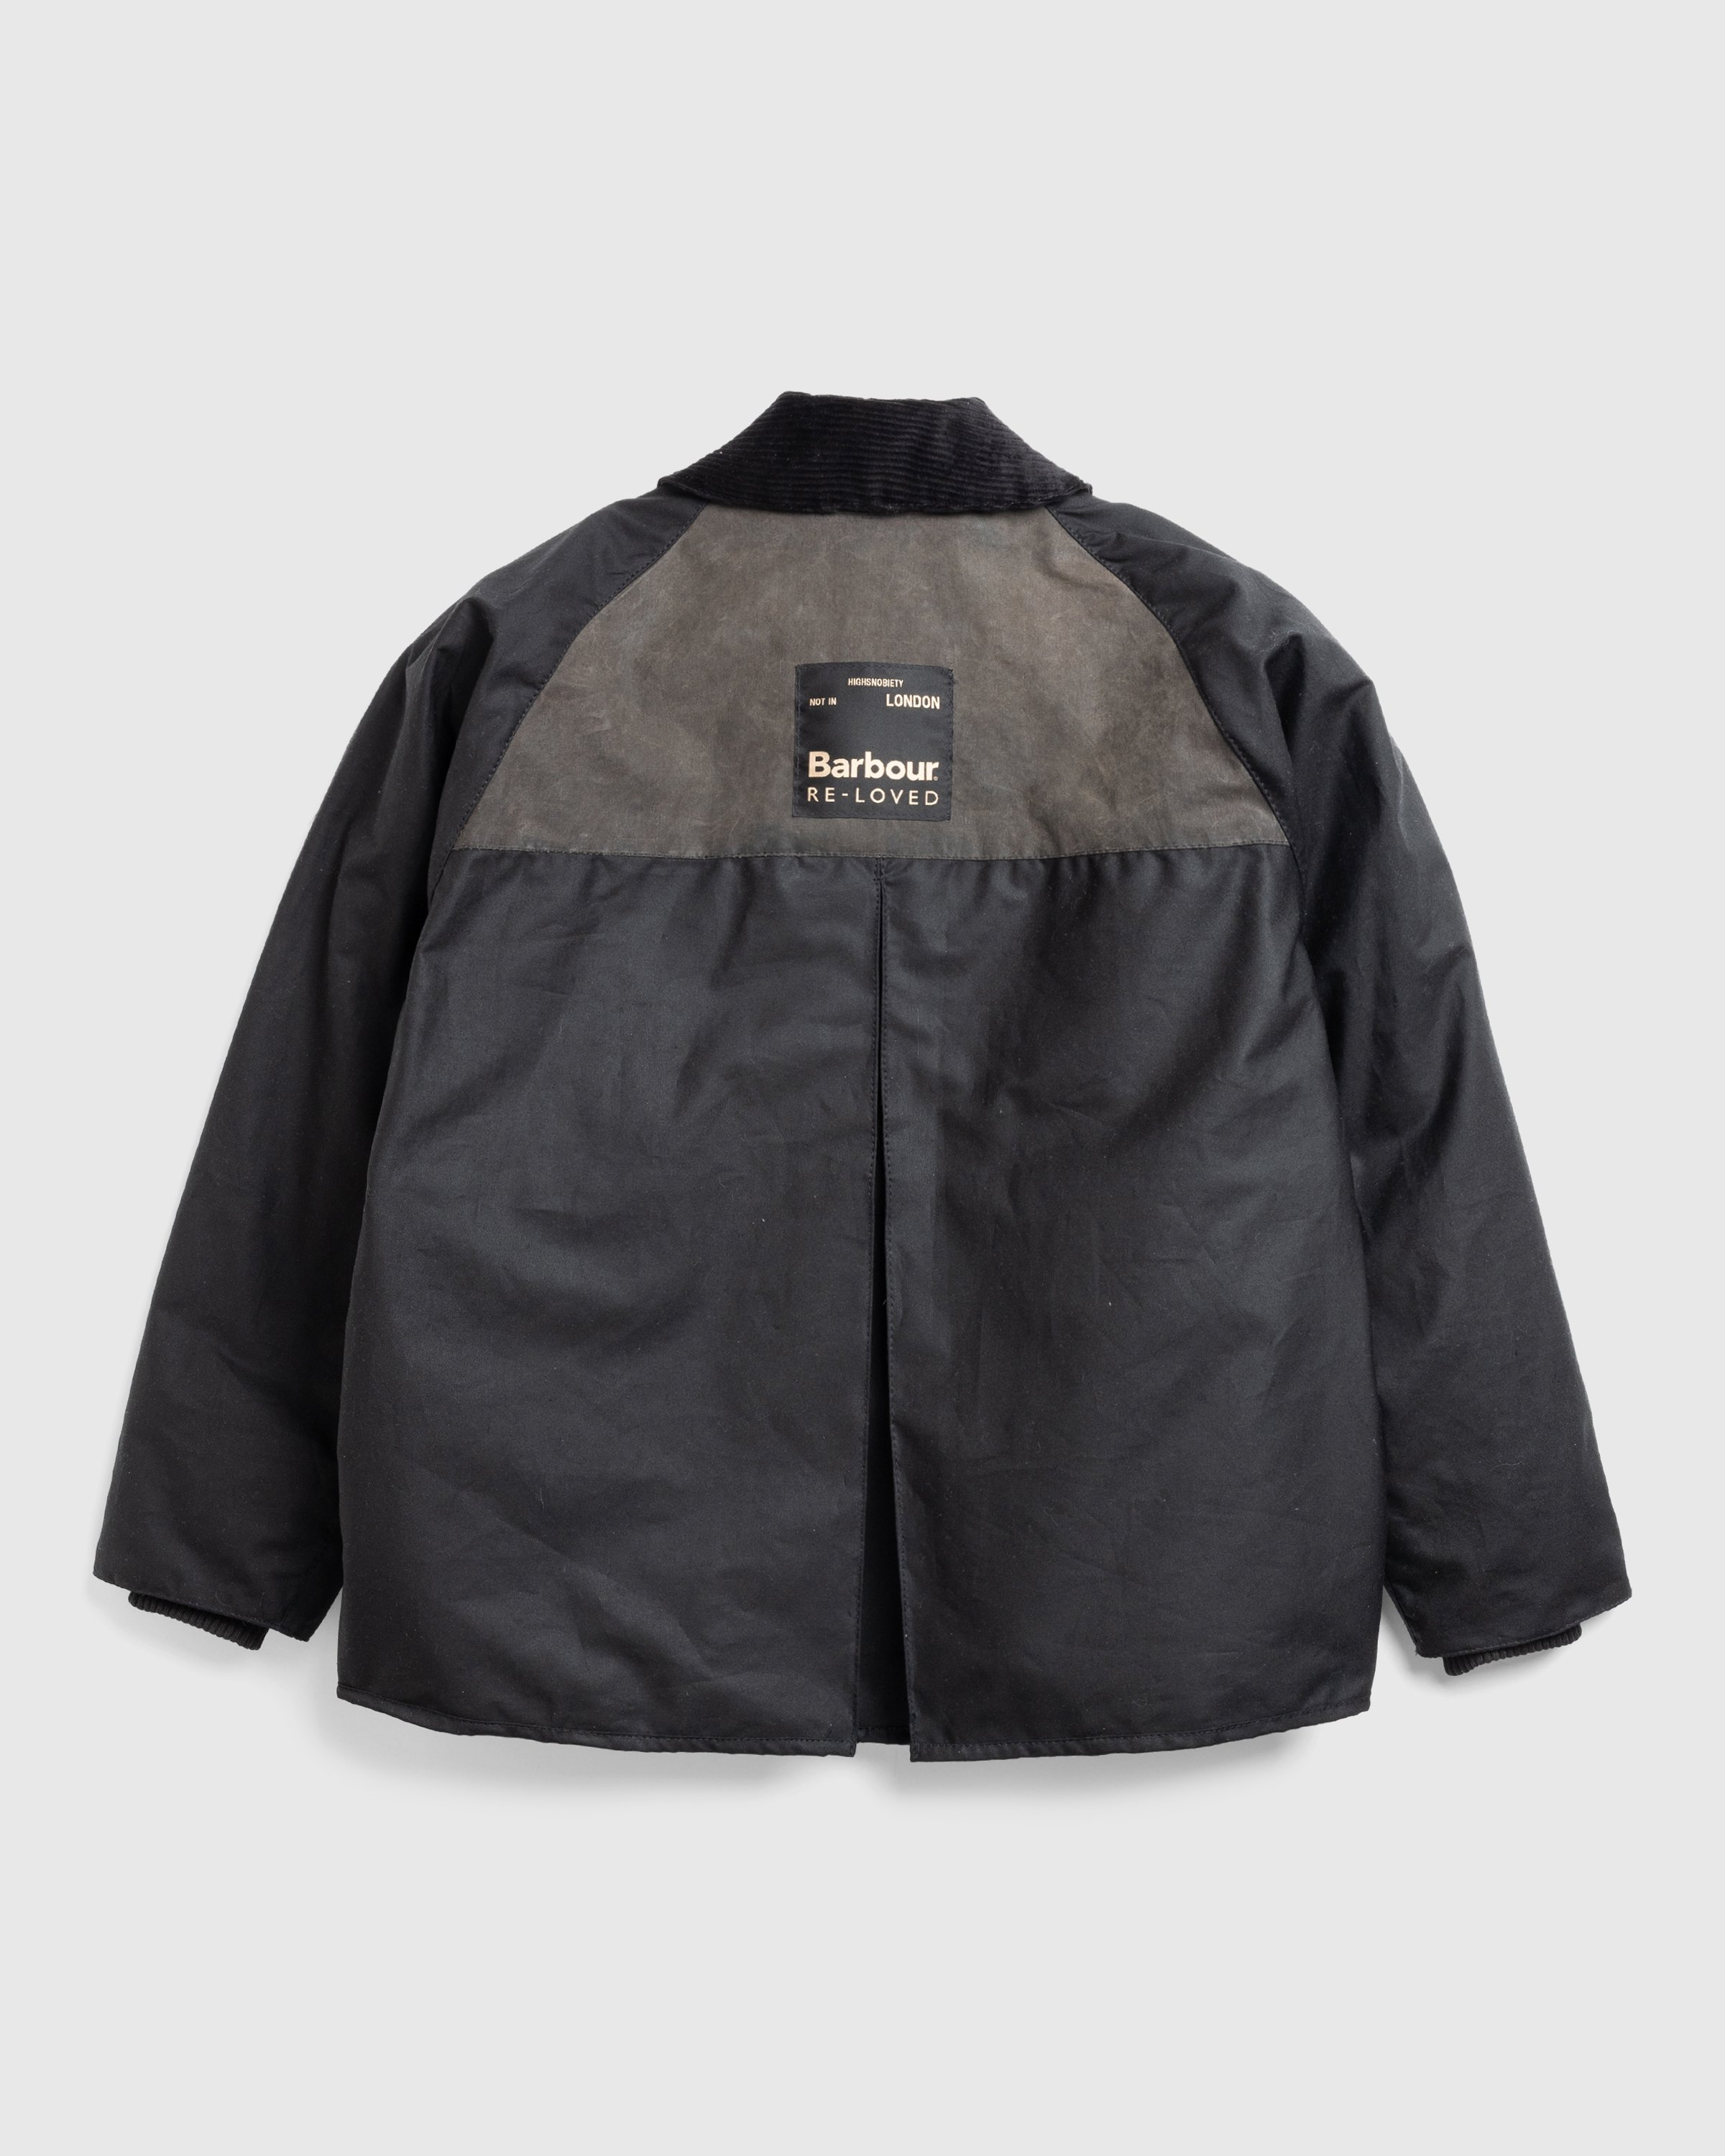 Barbour x Highsnobiety - Re-Loved Cropped Bedale Jacket 1 - 38 - Black - Clothing -  - Image 2